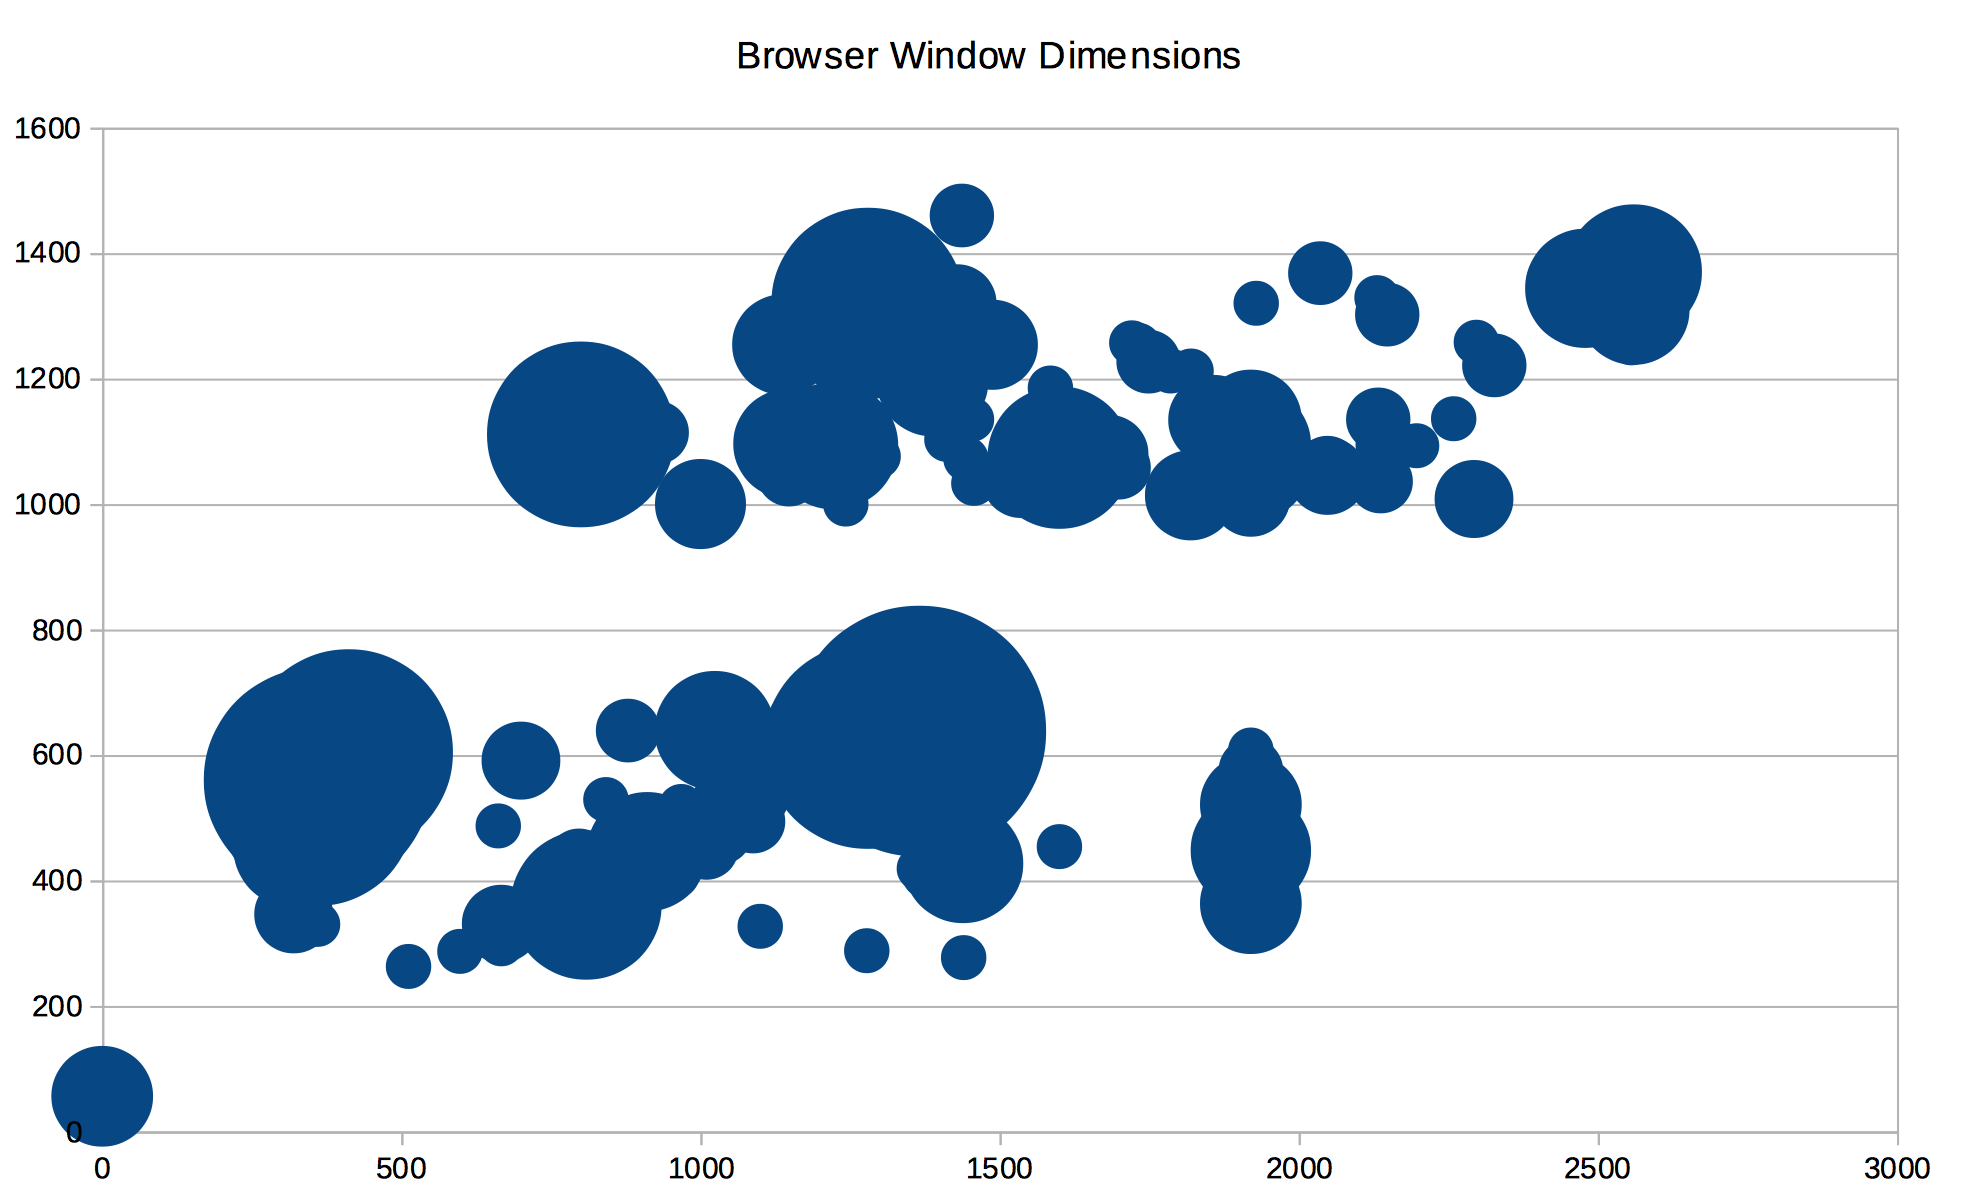 Browser window dimensions